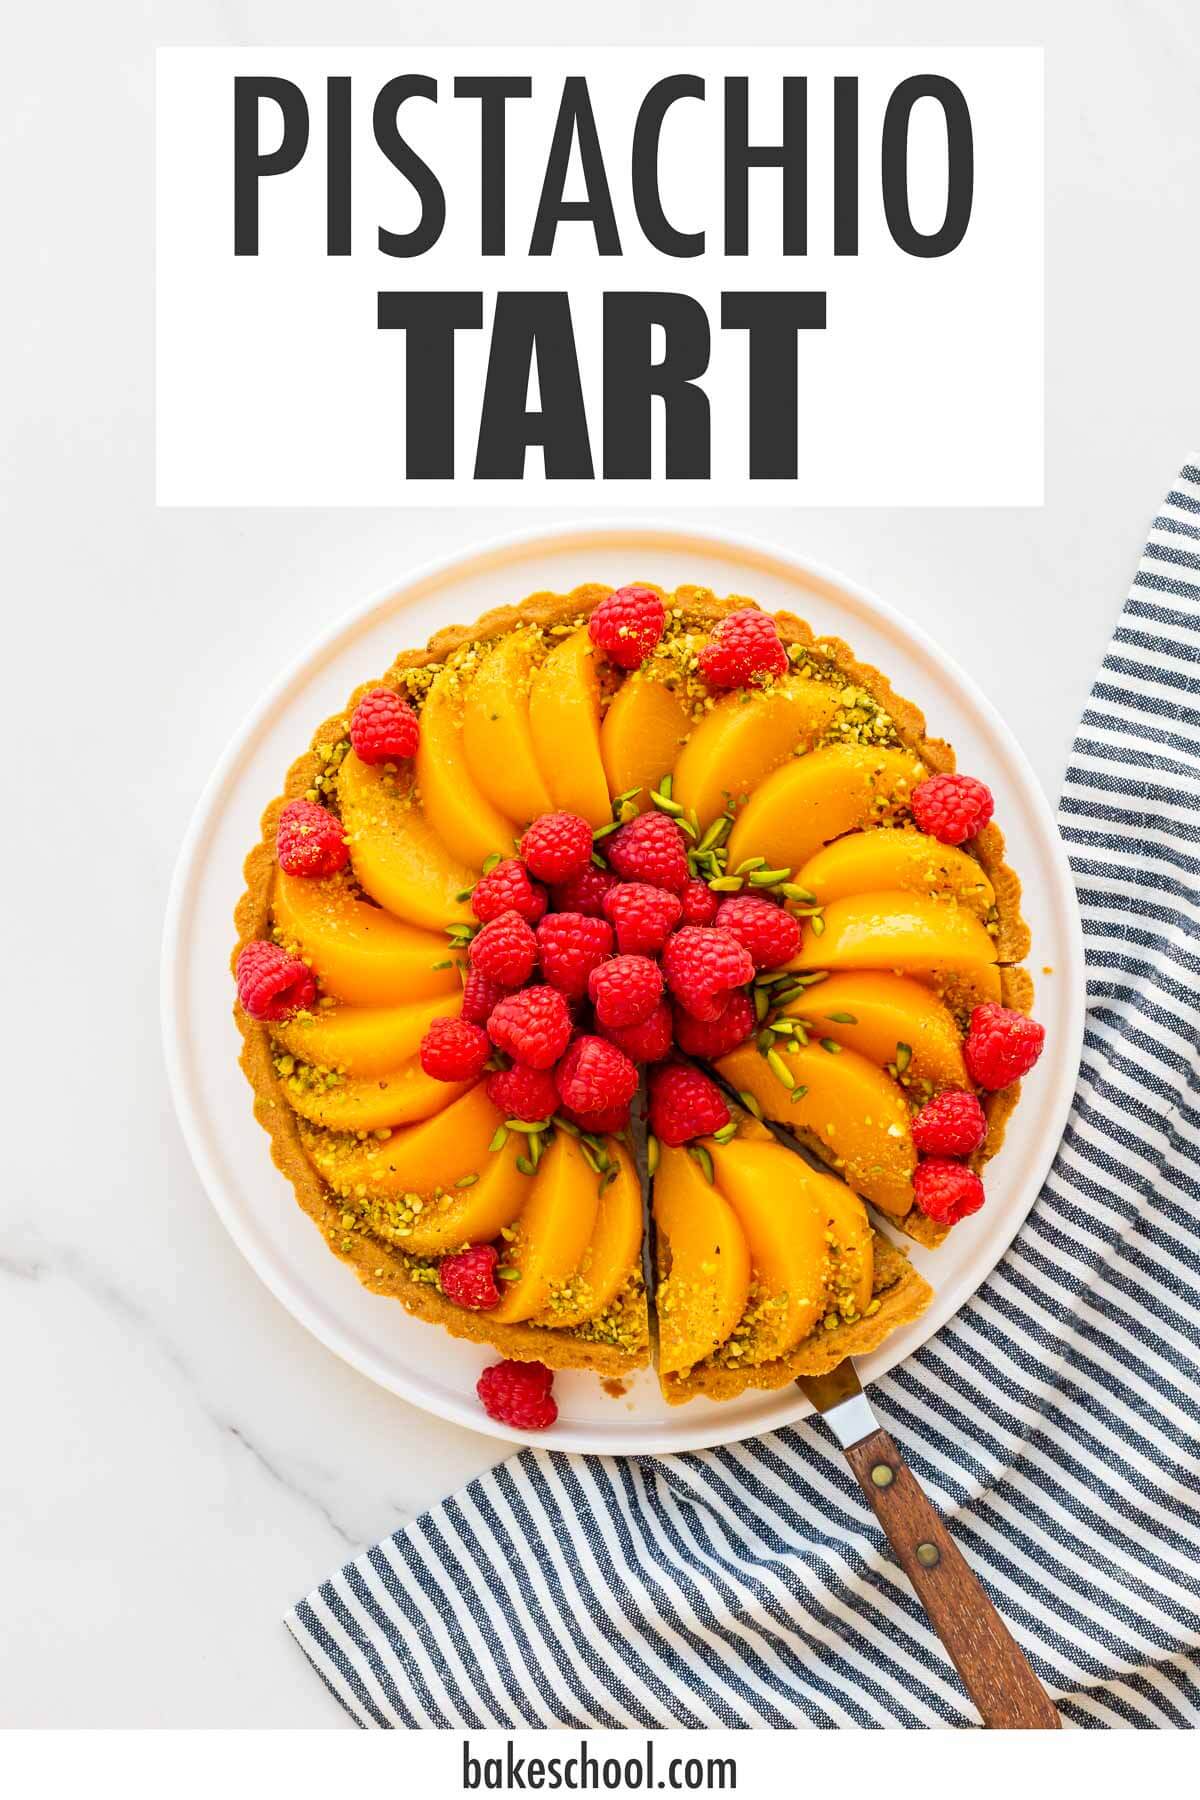 An image of a pistachio tart topped with slices of peaches and raspberries being served. Text overlay says "Pistachio tart".